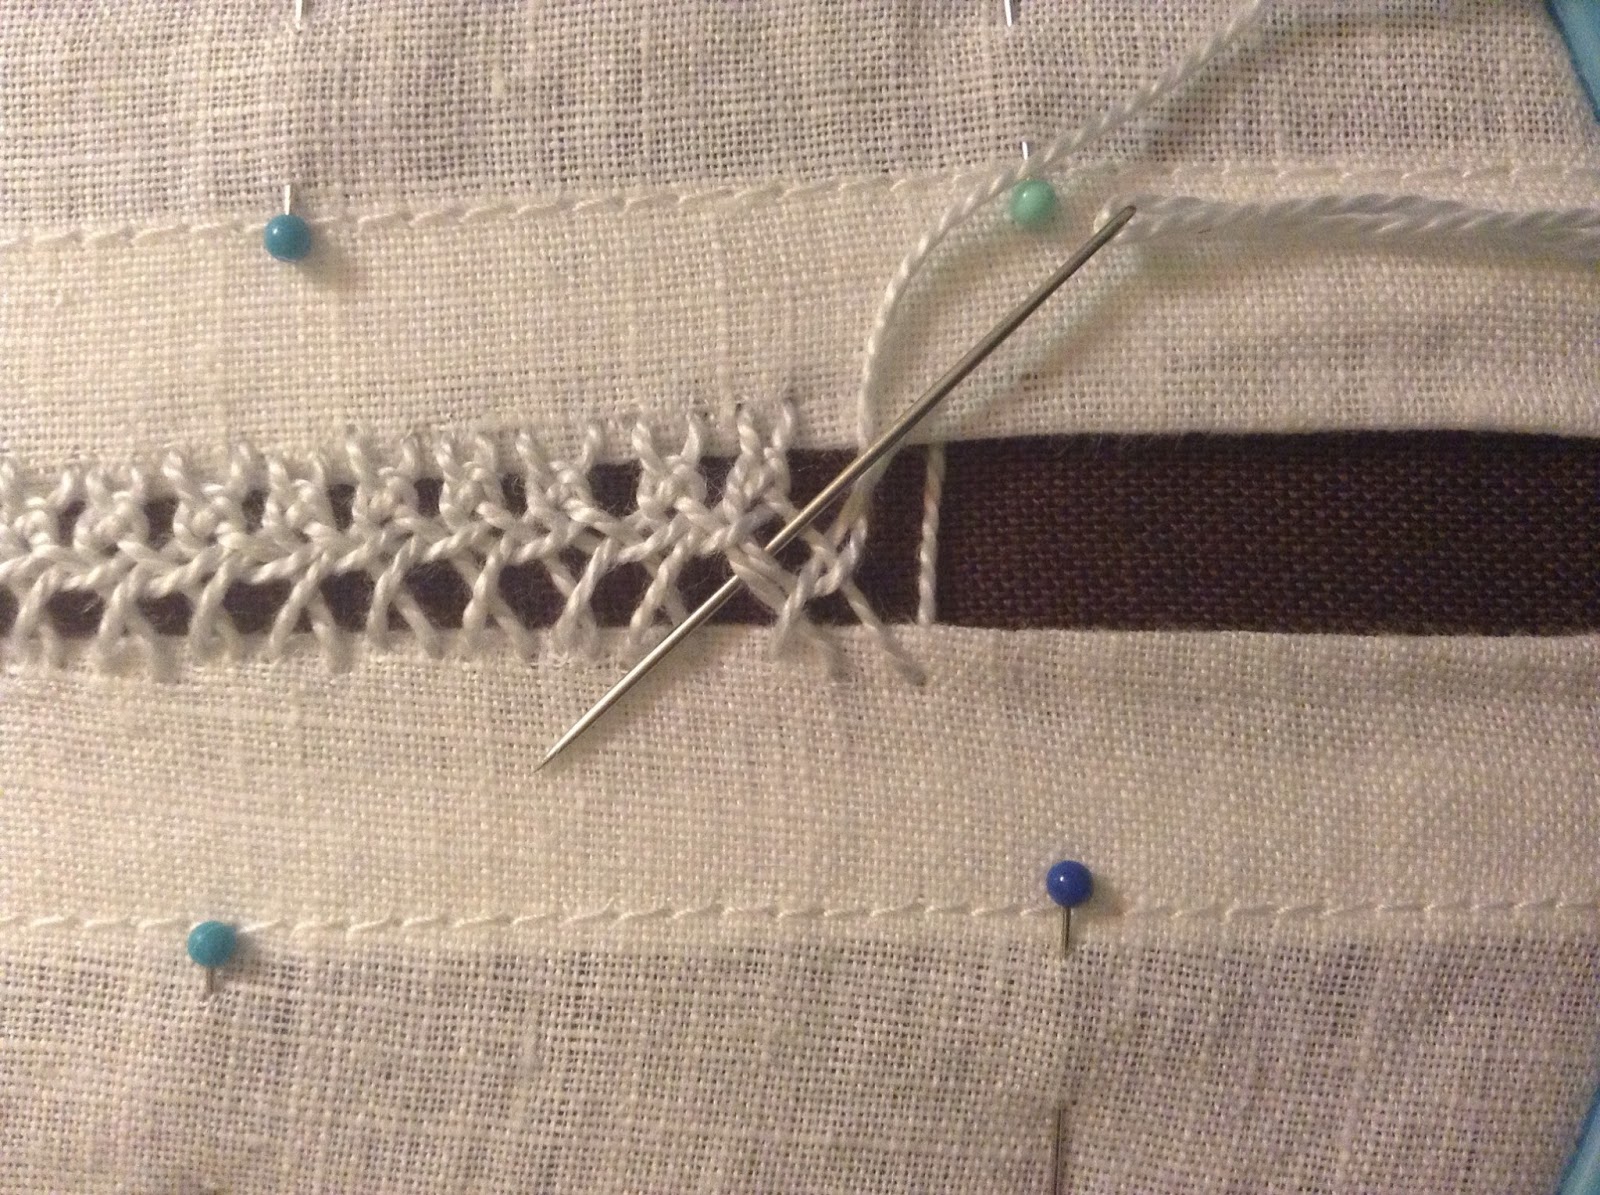 Interlaced Herringbone Insertion Stitch | The Compleatly Dressed ...